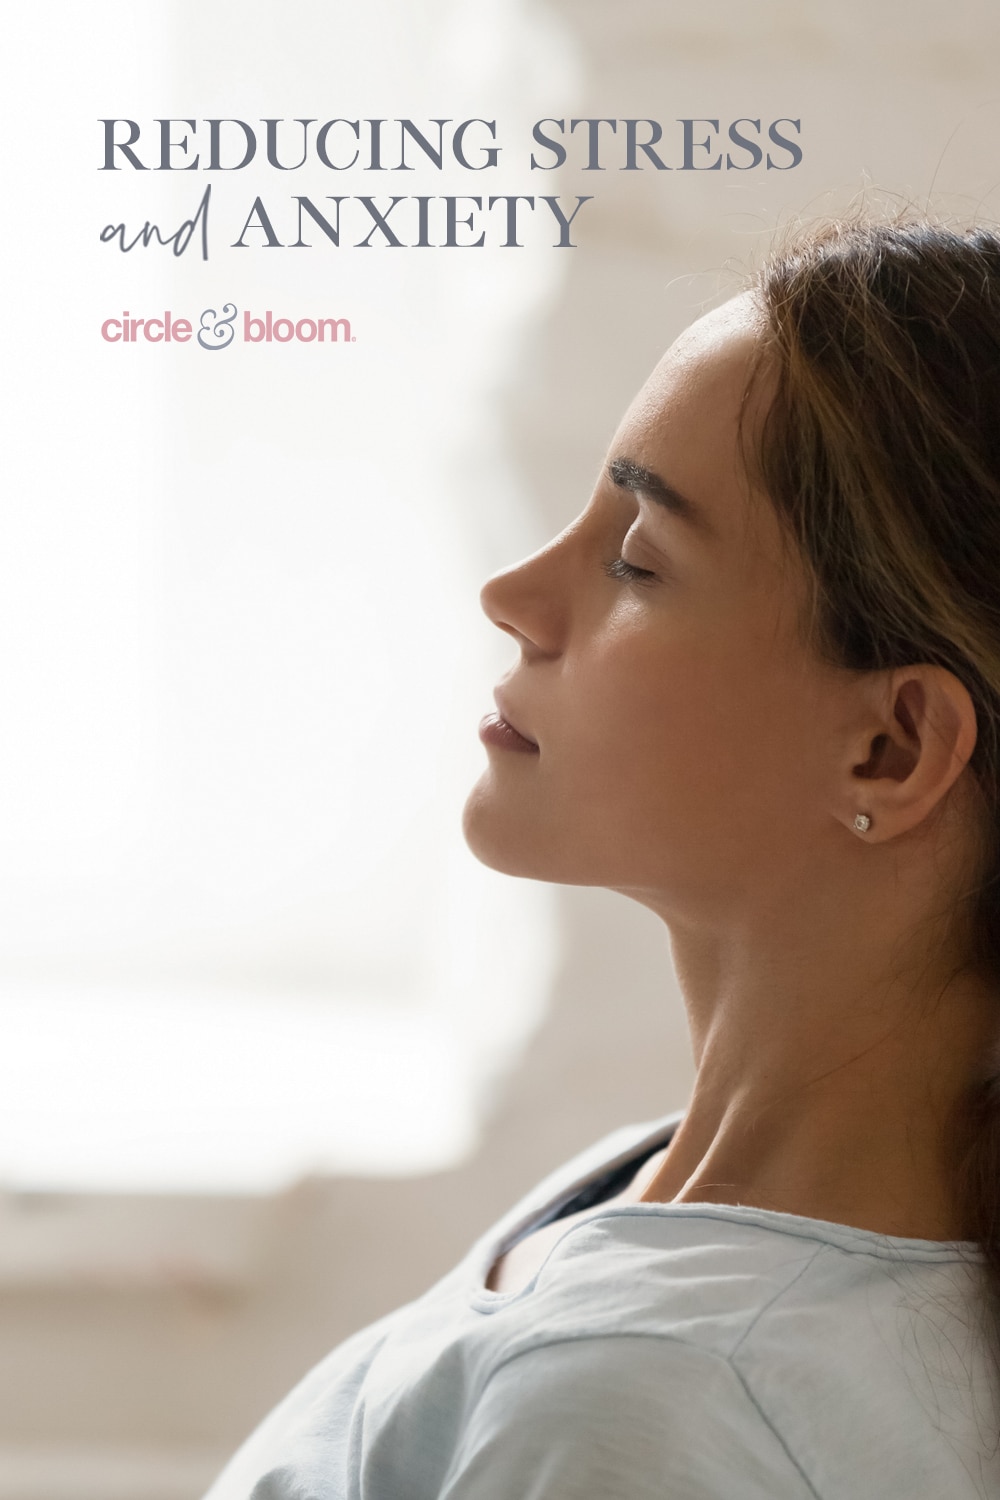 Can Breathwork Reduce Stress and Anxiety?